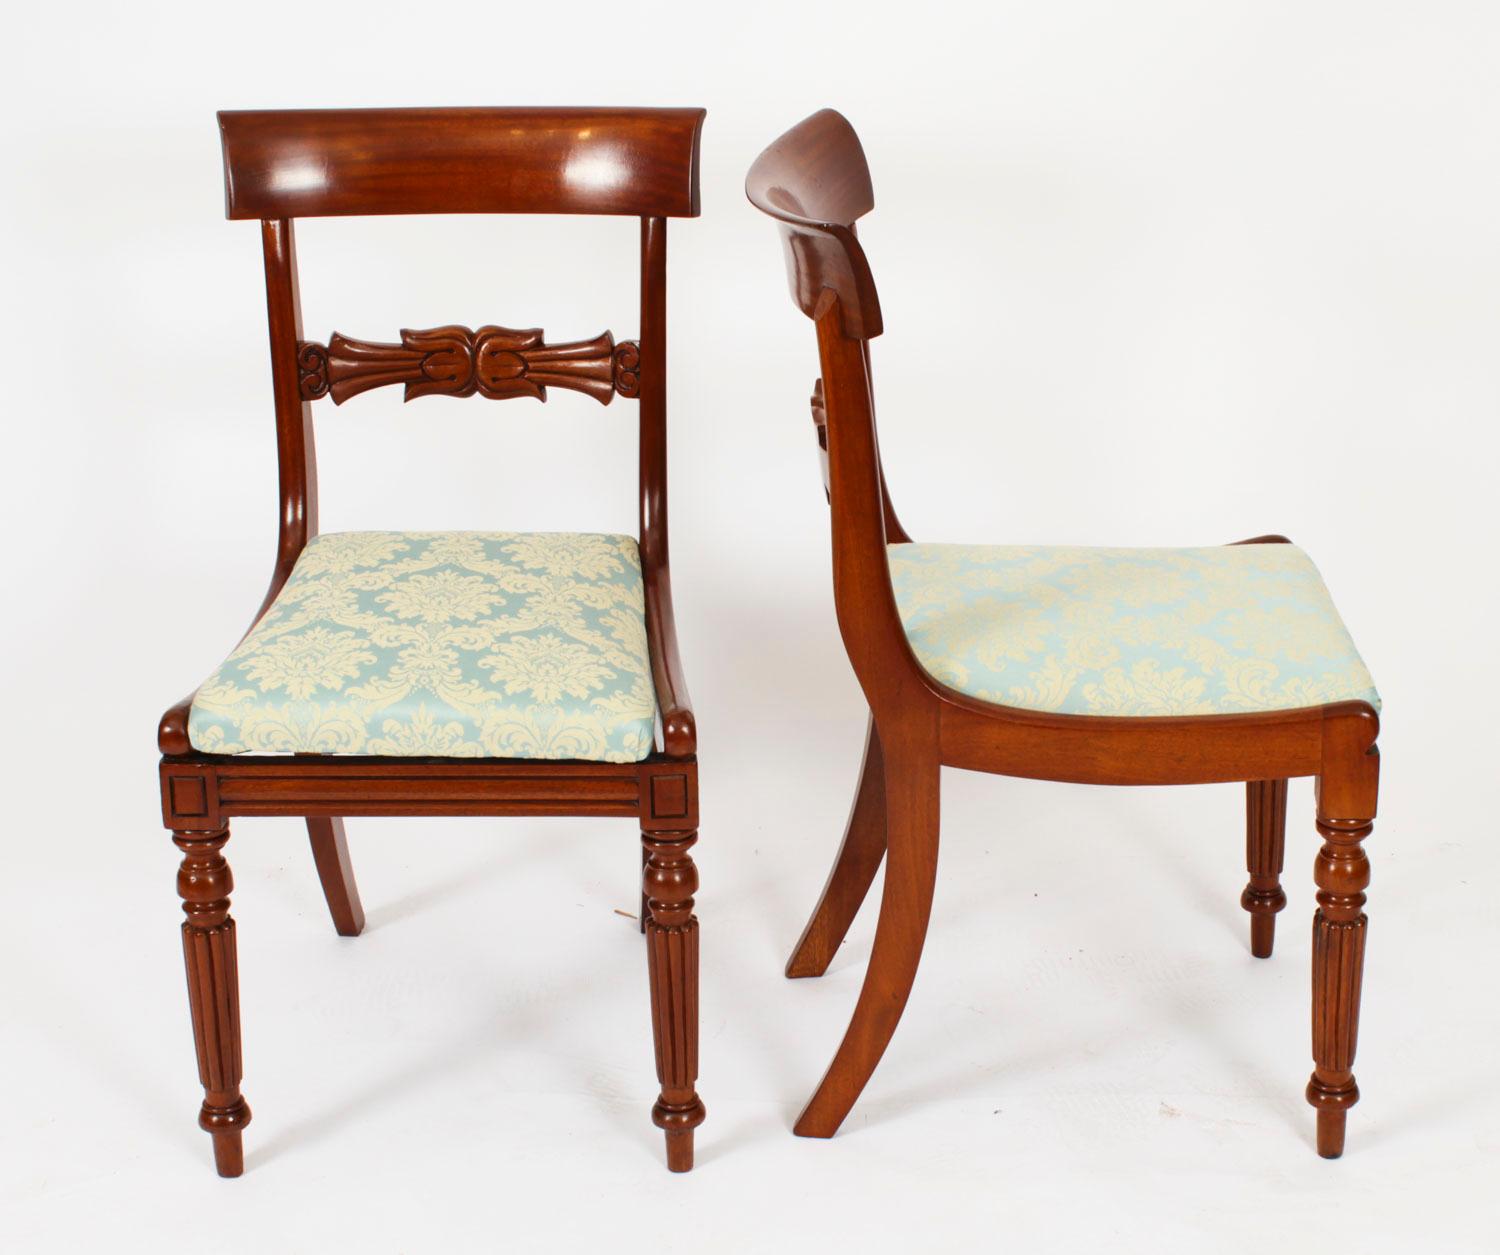 A fabulous set of eight Regency Period George IV mahogany dining chairs, Circa 1830 in date.
The set comprising six side chairs and two armchairs. The curved rectangular top rails over a beautifully carved acanthus mid rail. The drop in seats have